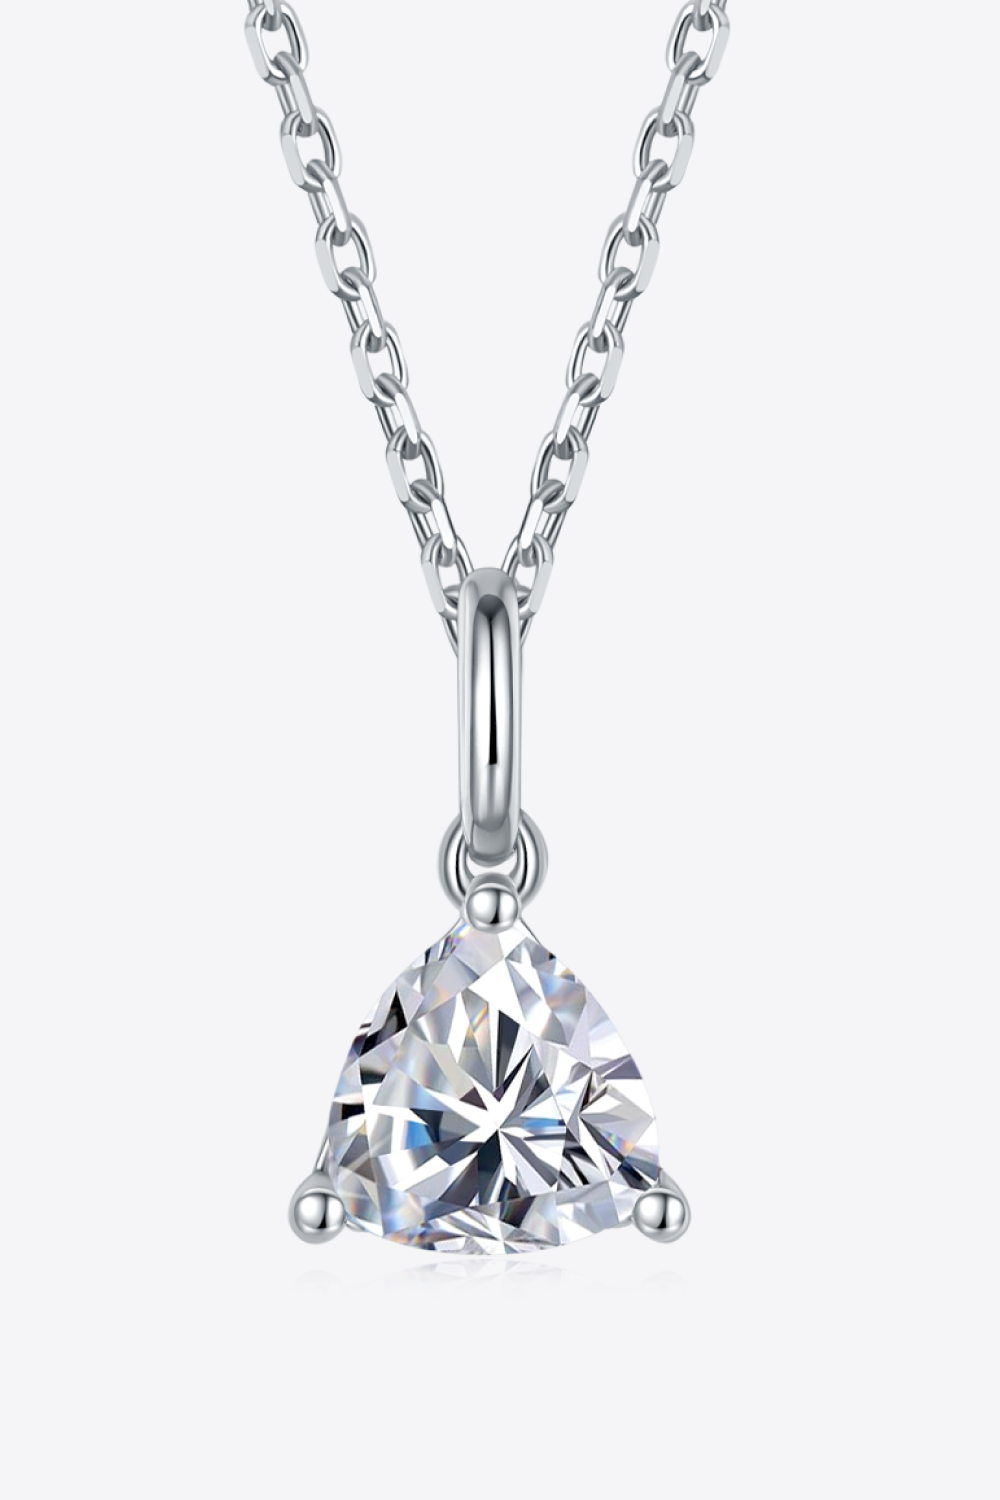 Jewelry 1 Carat Moissanite Pendant 925 Sterling Silver Necklace